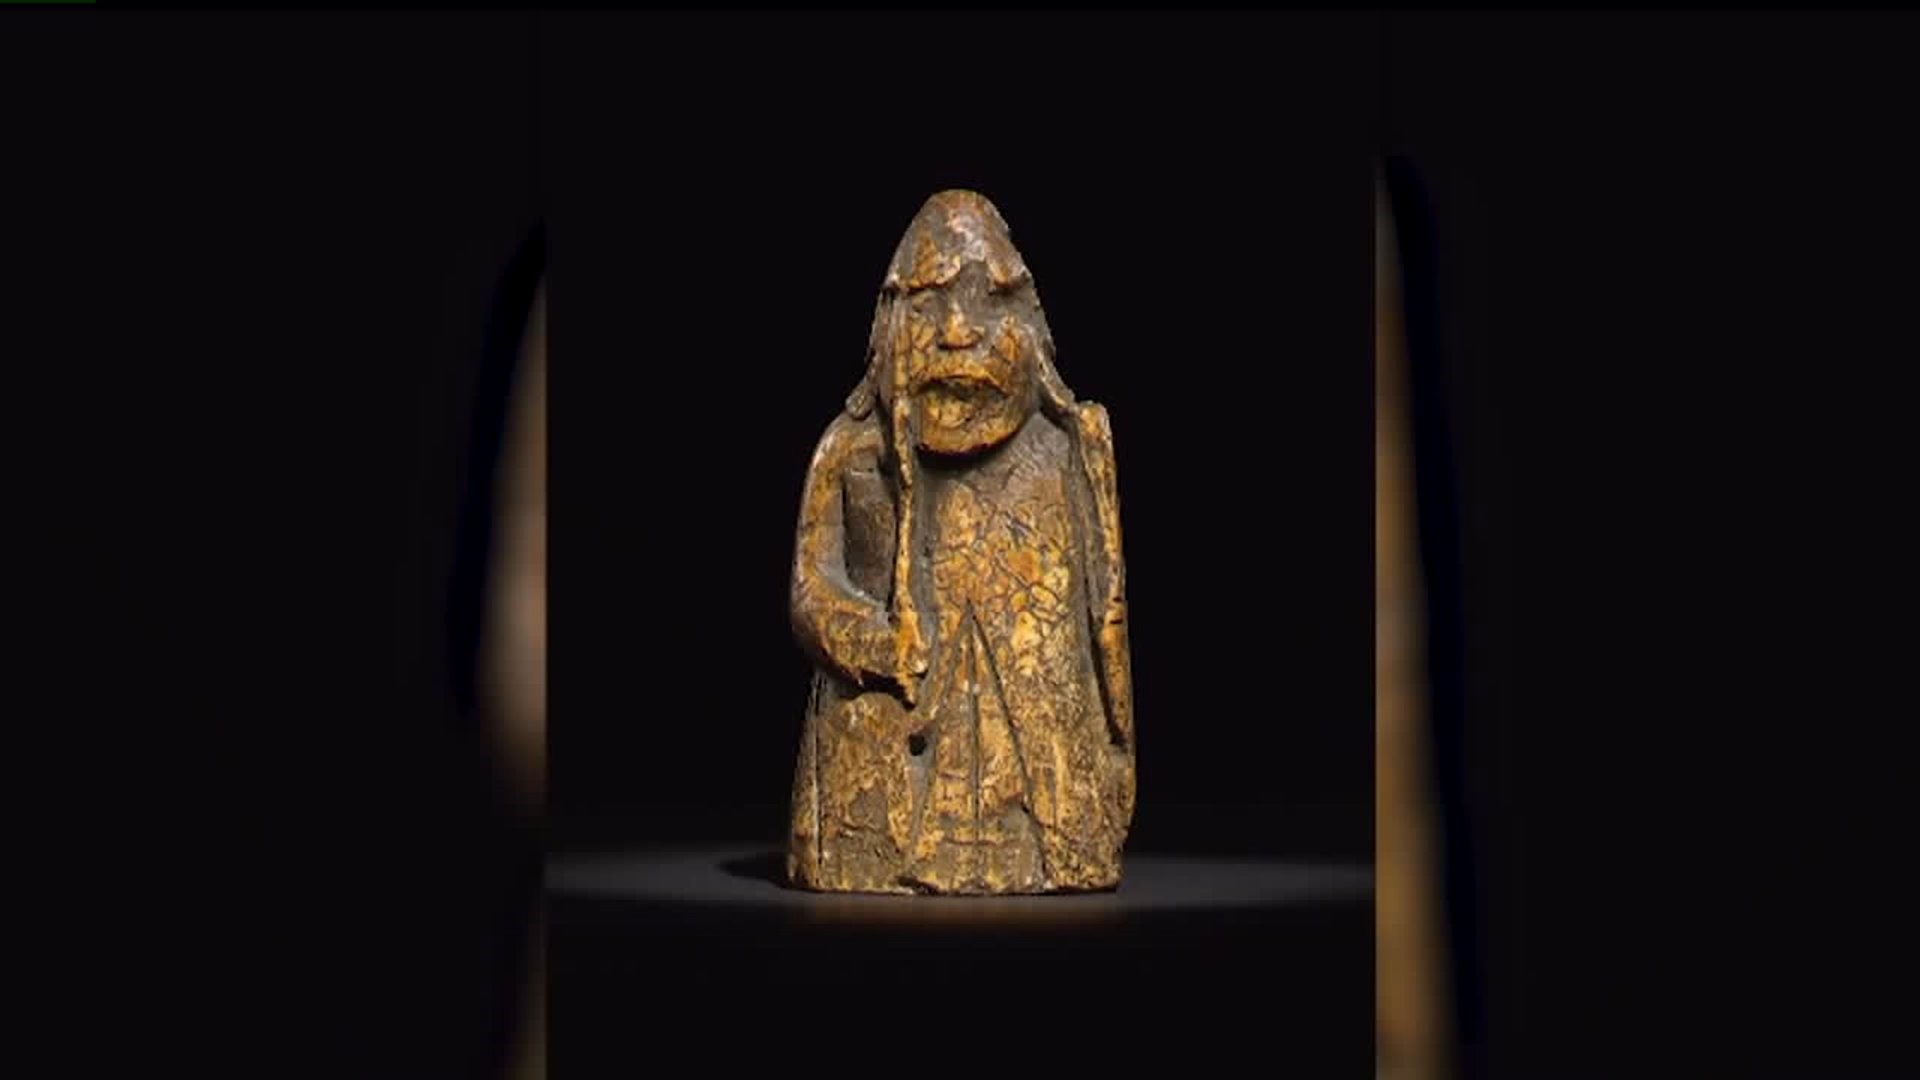 Chess piece sold at auction